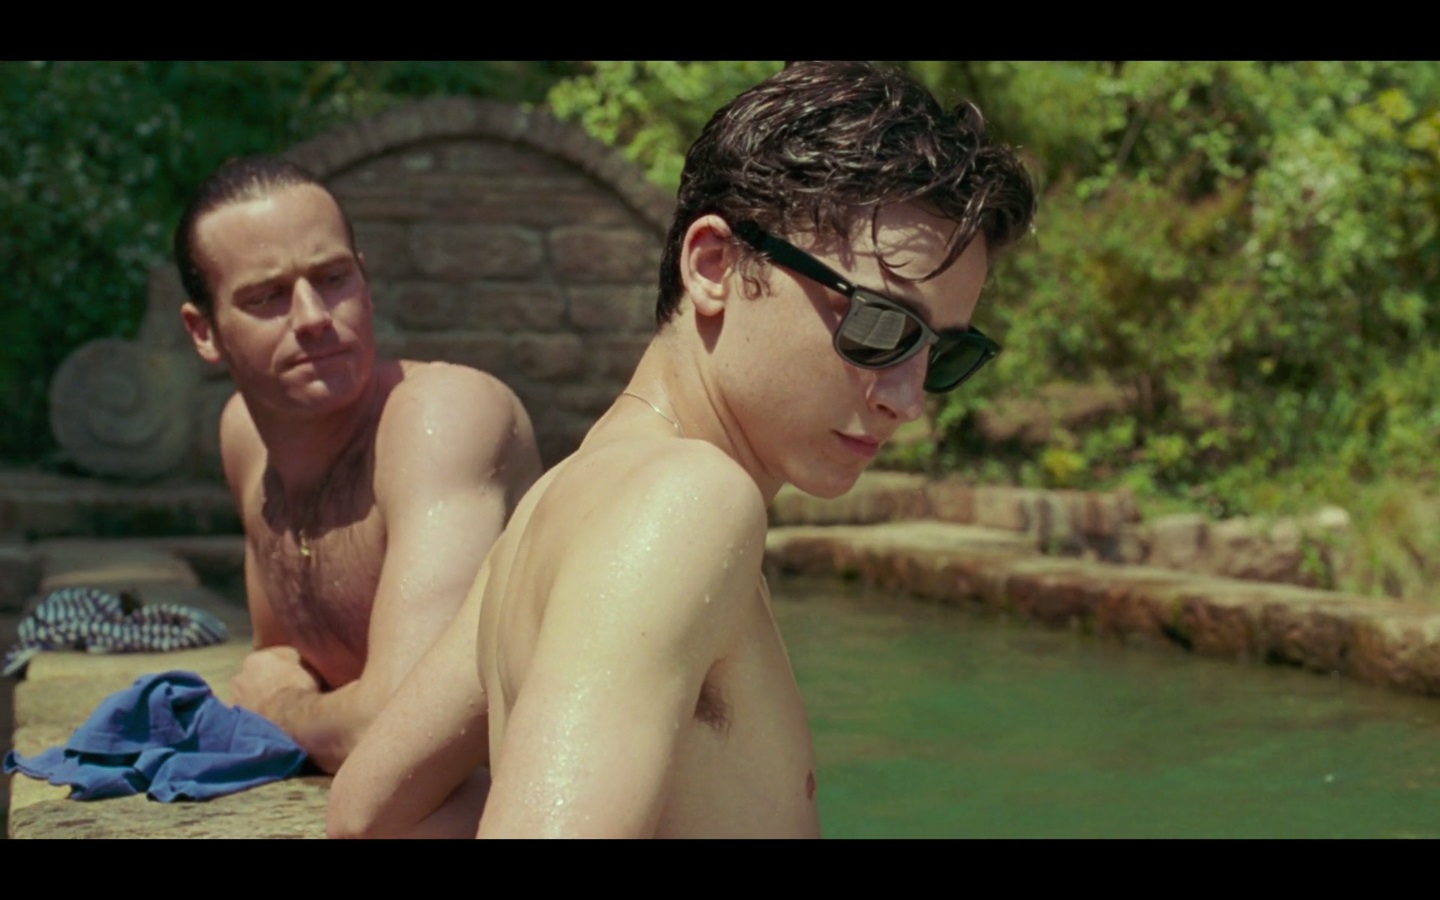 Call Me By Your Name - Timothée Chalamet & Armie Hammer.